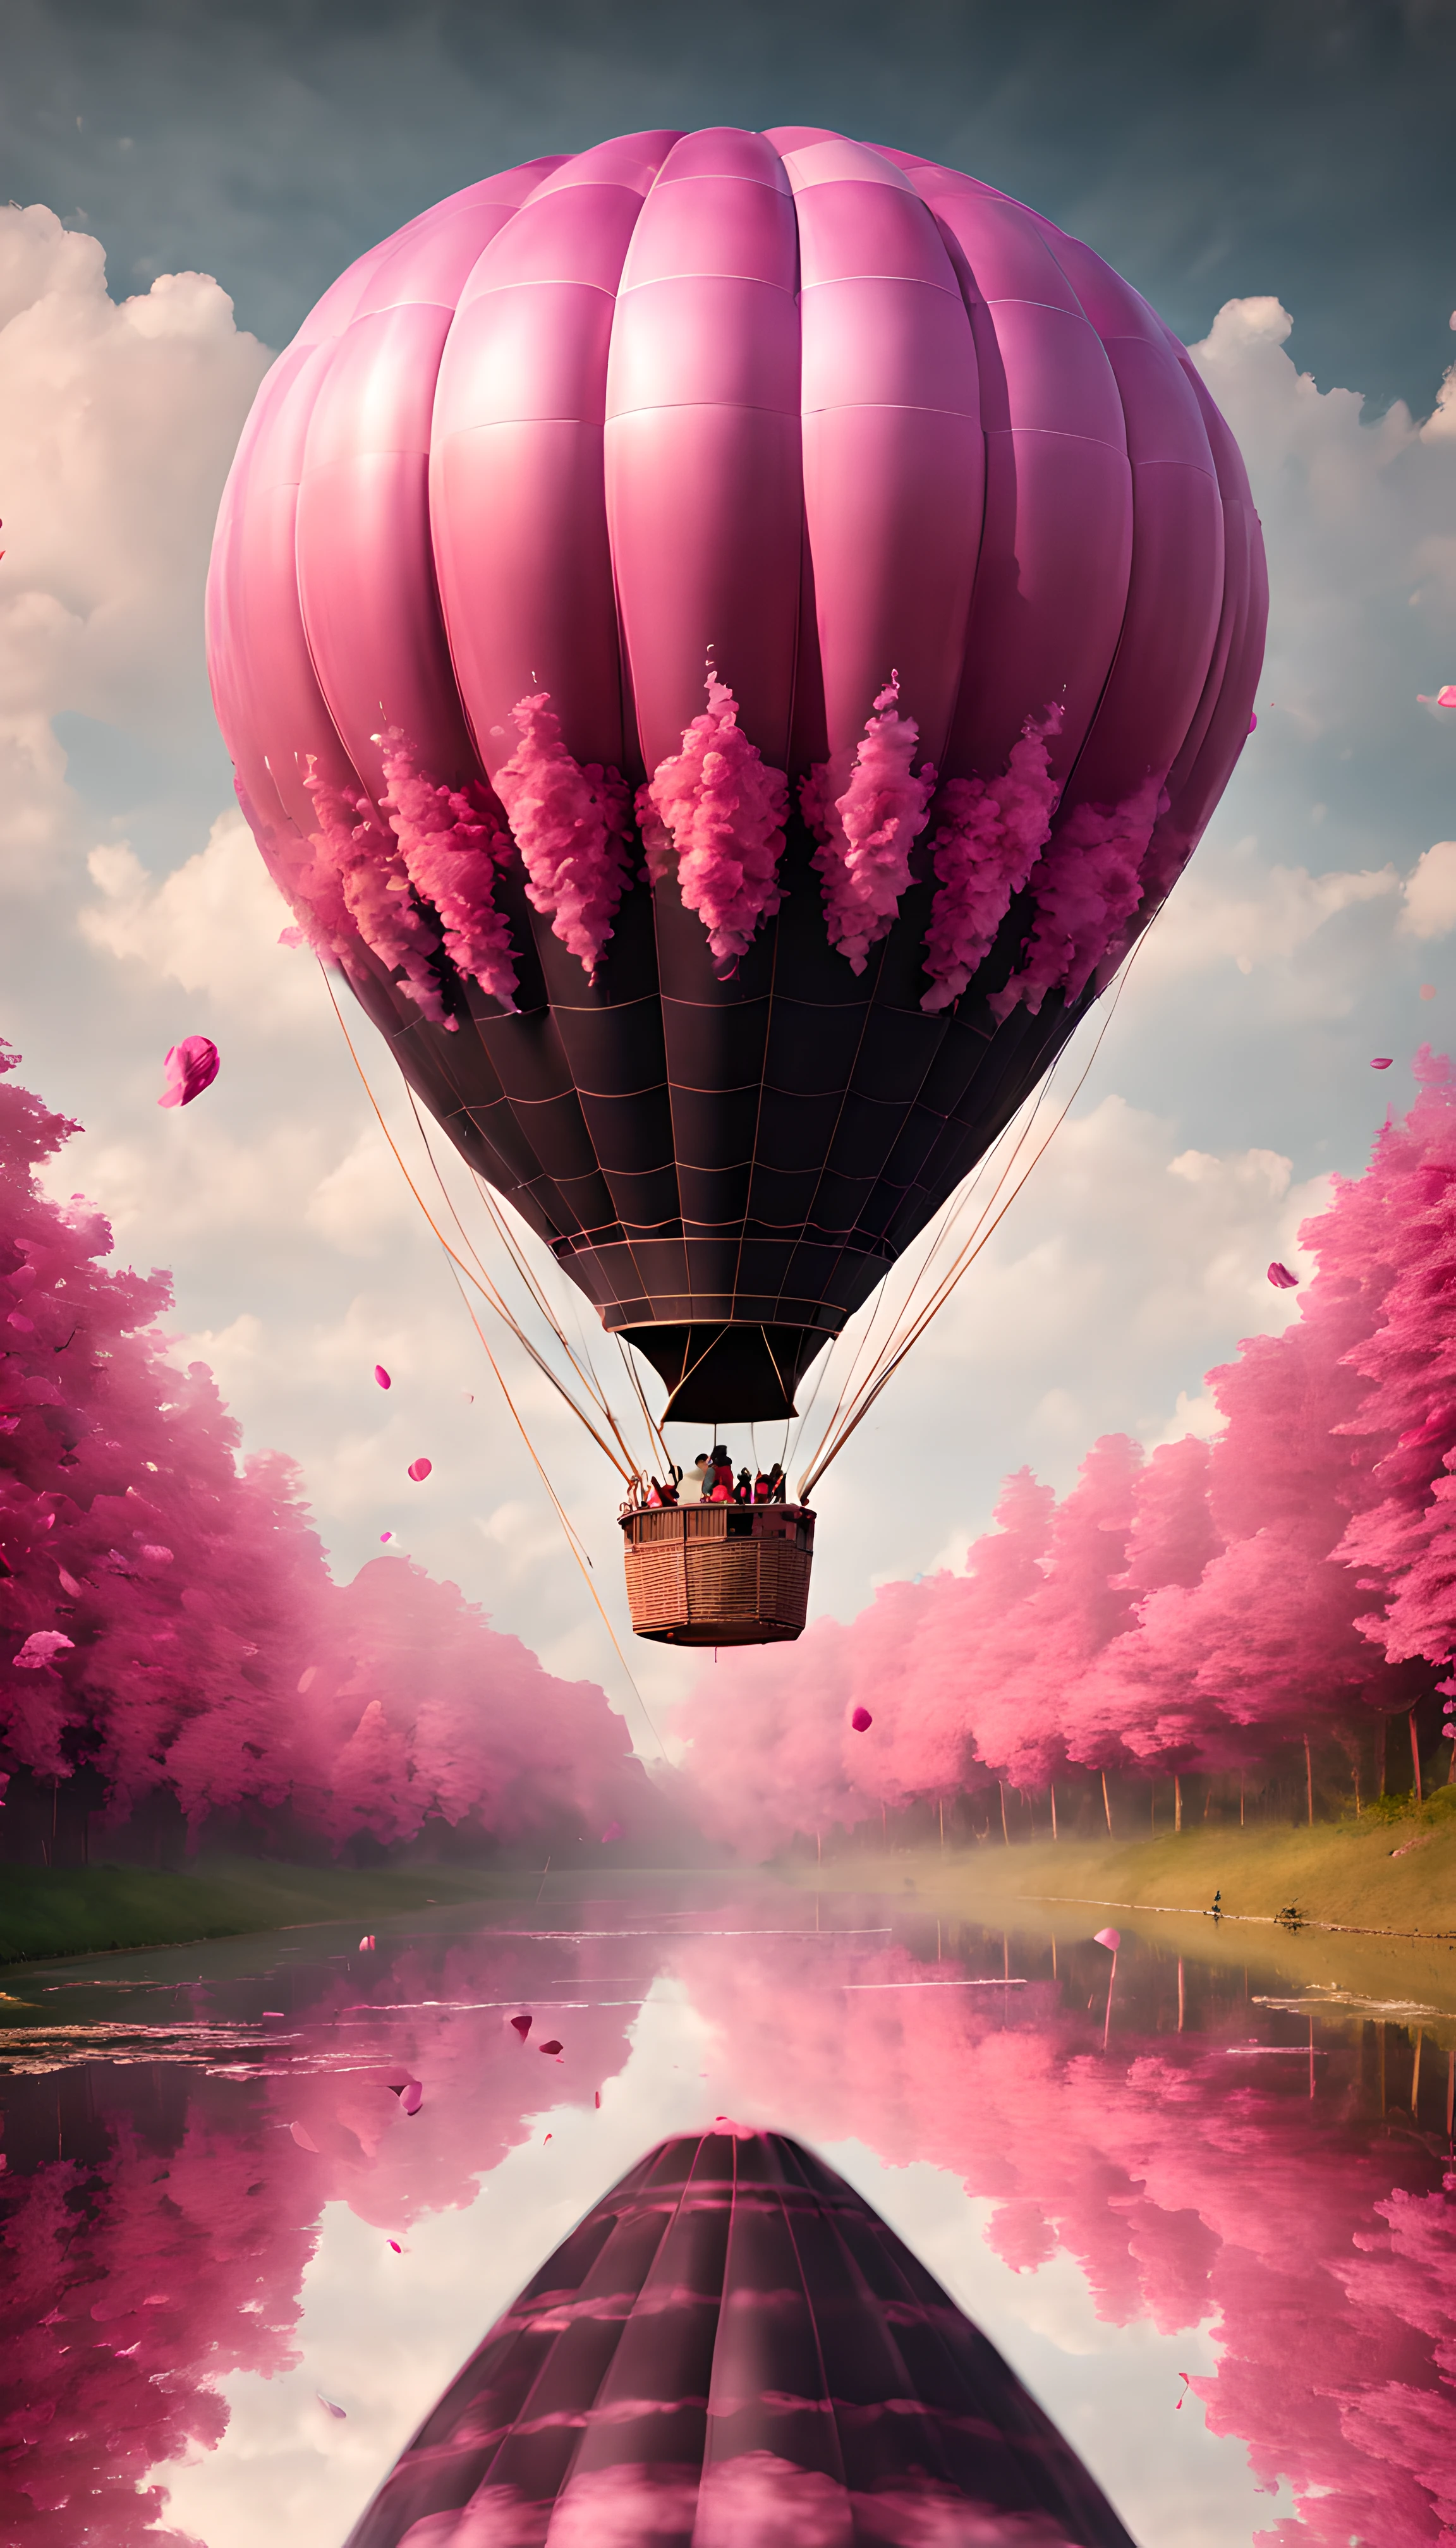 masterpiece, best quality, (epic, absurd, elegant) mirror reflection of a big (gothic) hot air balloon, (falling romantic flows of pink petals), summer, volumetric lighting